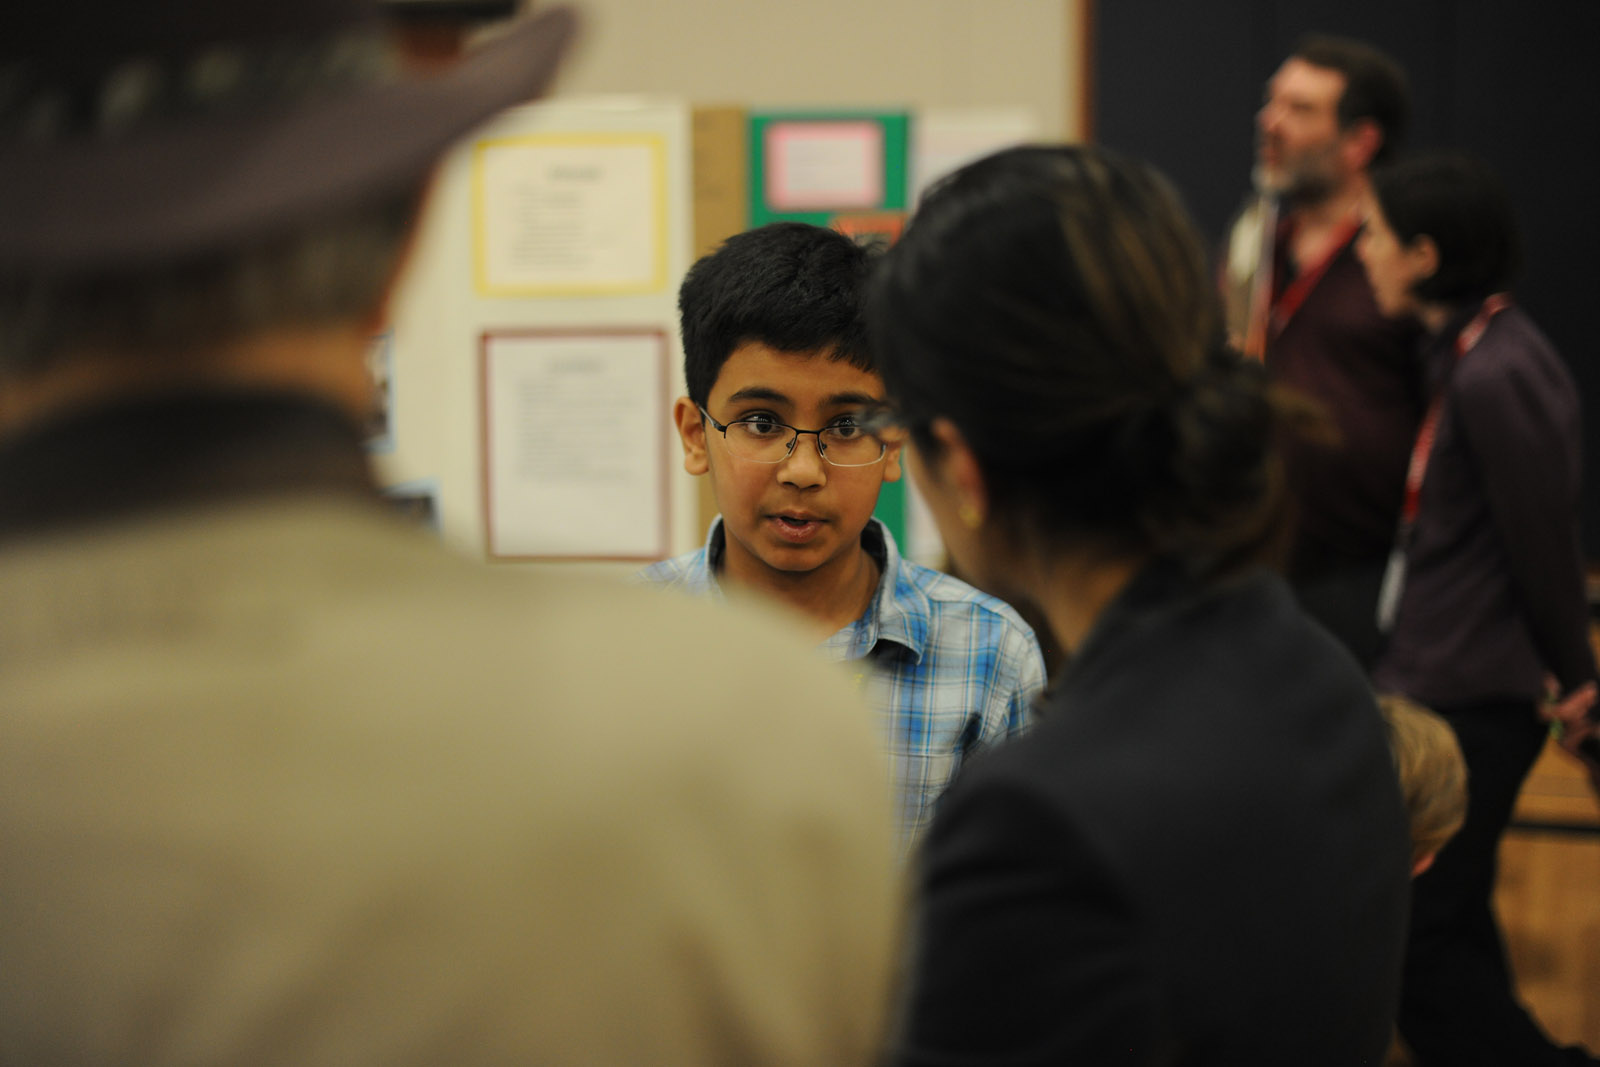 Science Fair 2016-04-01 by Mike Bay D3X 214